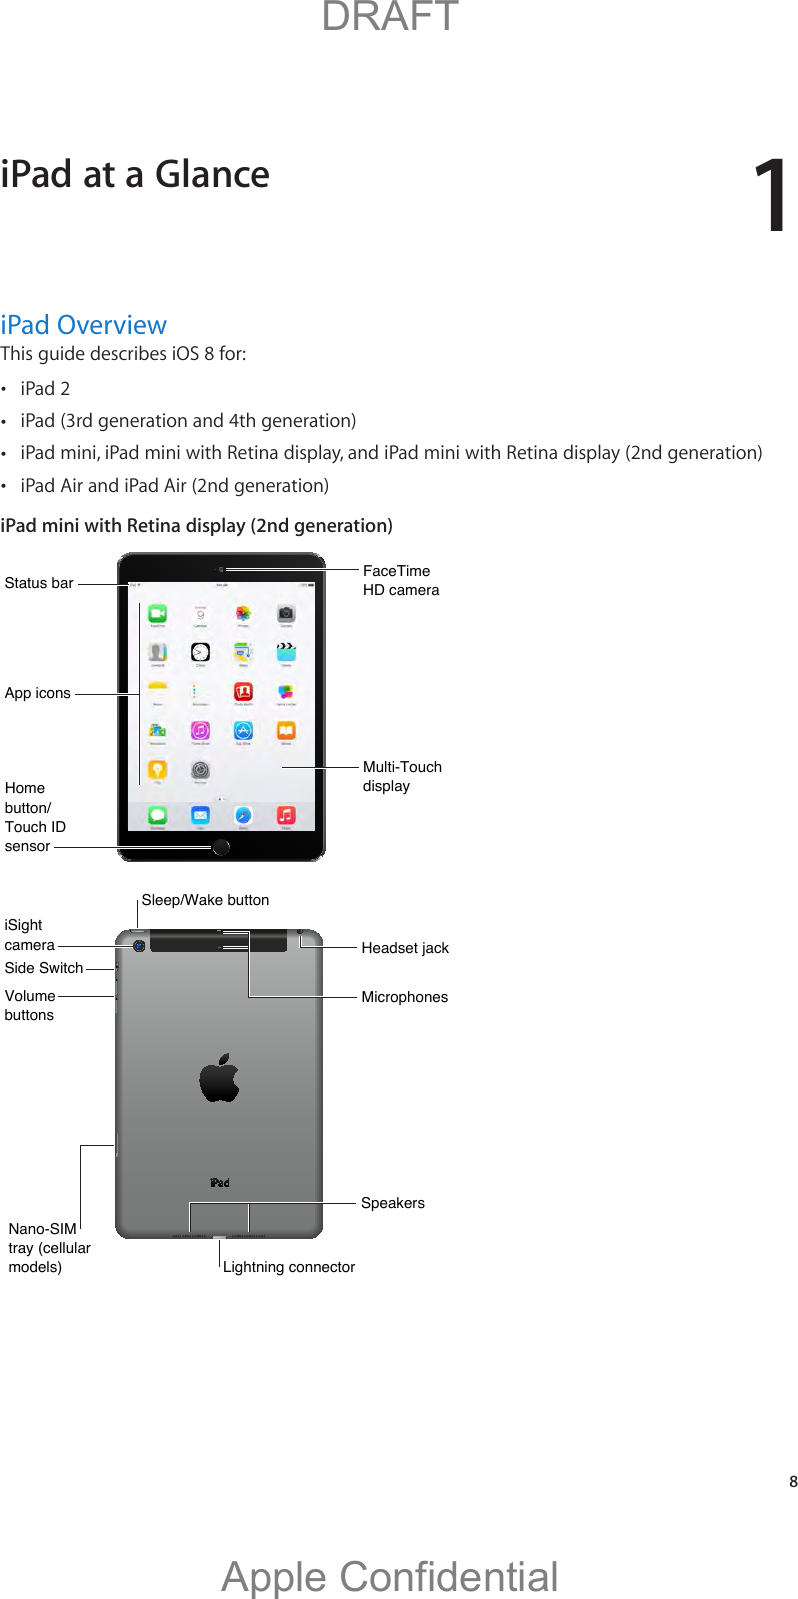 1   8iPad OverviewThis guide describes iOS 8 for: %iPad 2 %iPad (3rd generation and 4th generation) %iPad mini, iPad mini with Retina display, and iPad mini with Retina display (2nd generation) %iPad Air and iPad Air (2nd generation)iPad mini with Retina display (2nd generation)Multi-TouchdisplayMulti-TouchdisplayFaceTimeHD cameraFaceTimeHD cameraApp iconsApp iconsStatus barStatus barHome button/Touch ID sensorHome button/Touch ID sensorLightning connectorLightning connectorSpeakersSpeakersHeadset jackHeadset jackSleep/Wake buttonSleep/Wake buttoniSightcameraiSightcameraVolumebuttonsVolumebuttonsNano-SIM tray (cellular models)Nano-SIM tray (cellular models)Side SwitchSide SwitchMicrophonesMicrophonesiPad at a Glance          DRAFTApple Confidential